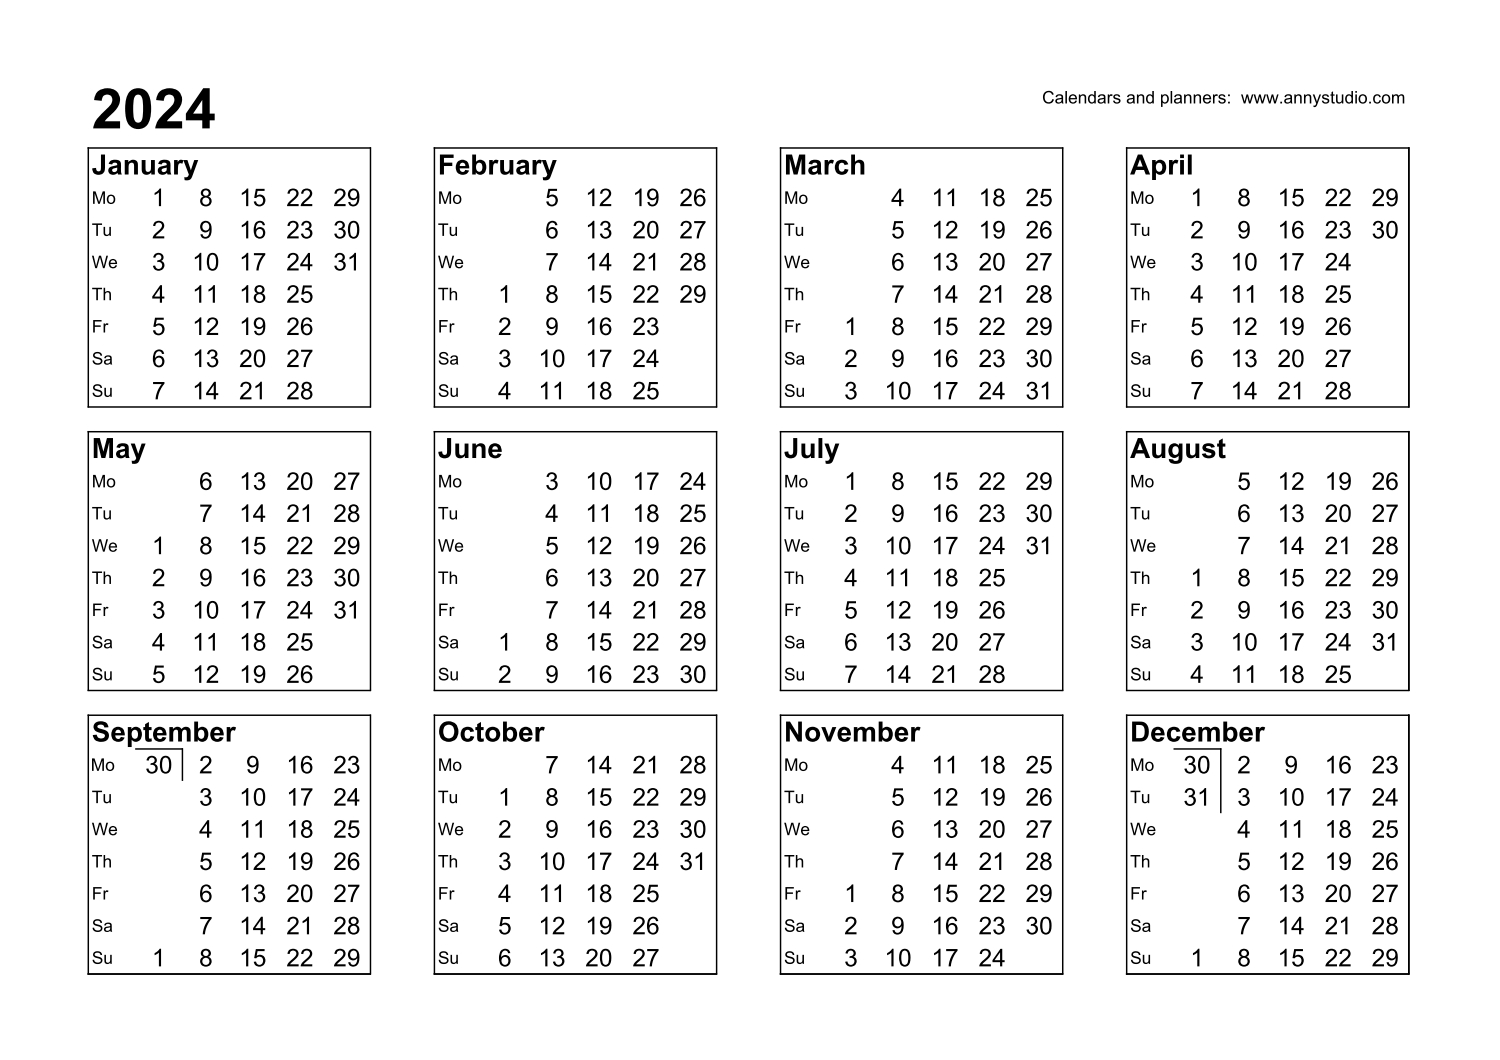 Free Printable Calendars And Planners 2024, 2025 And 2026 | Printable Calendar 2024 South Africa Pdf